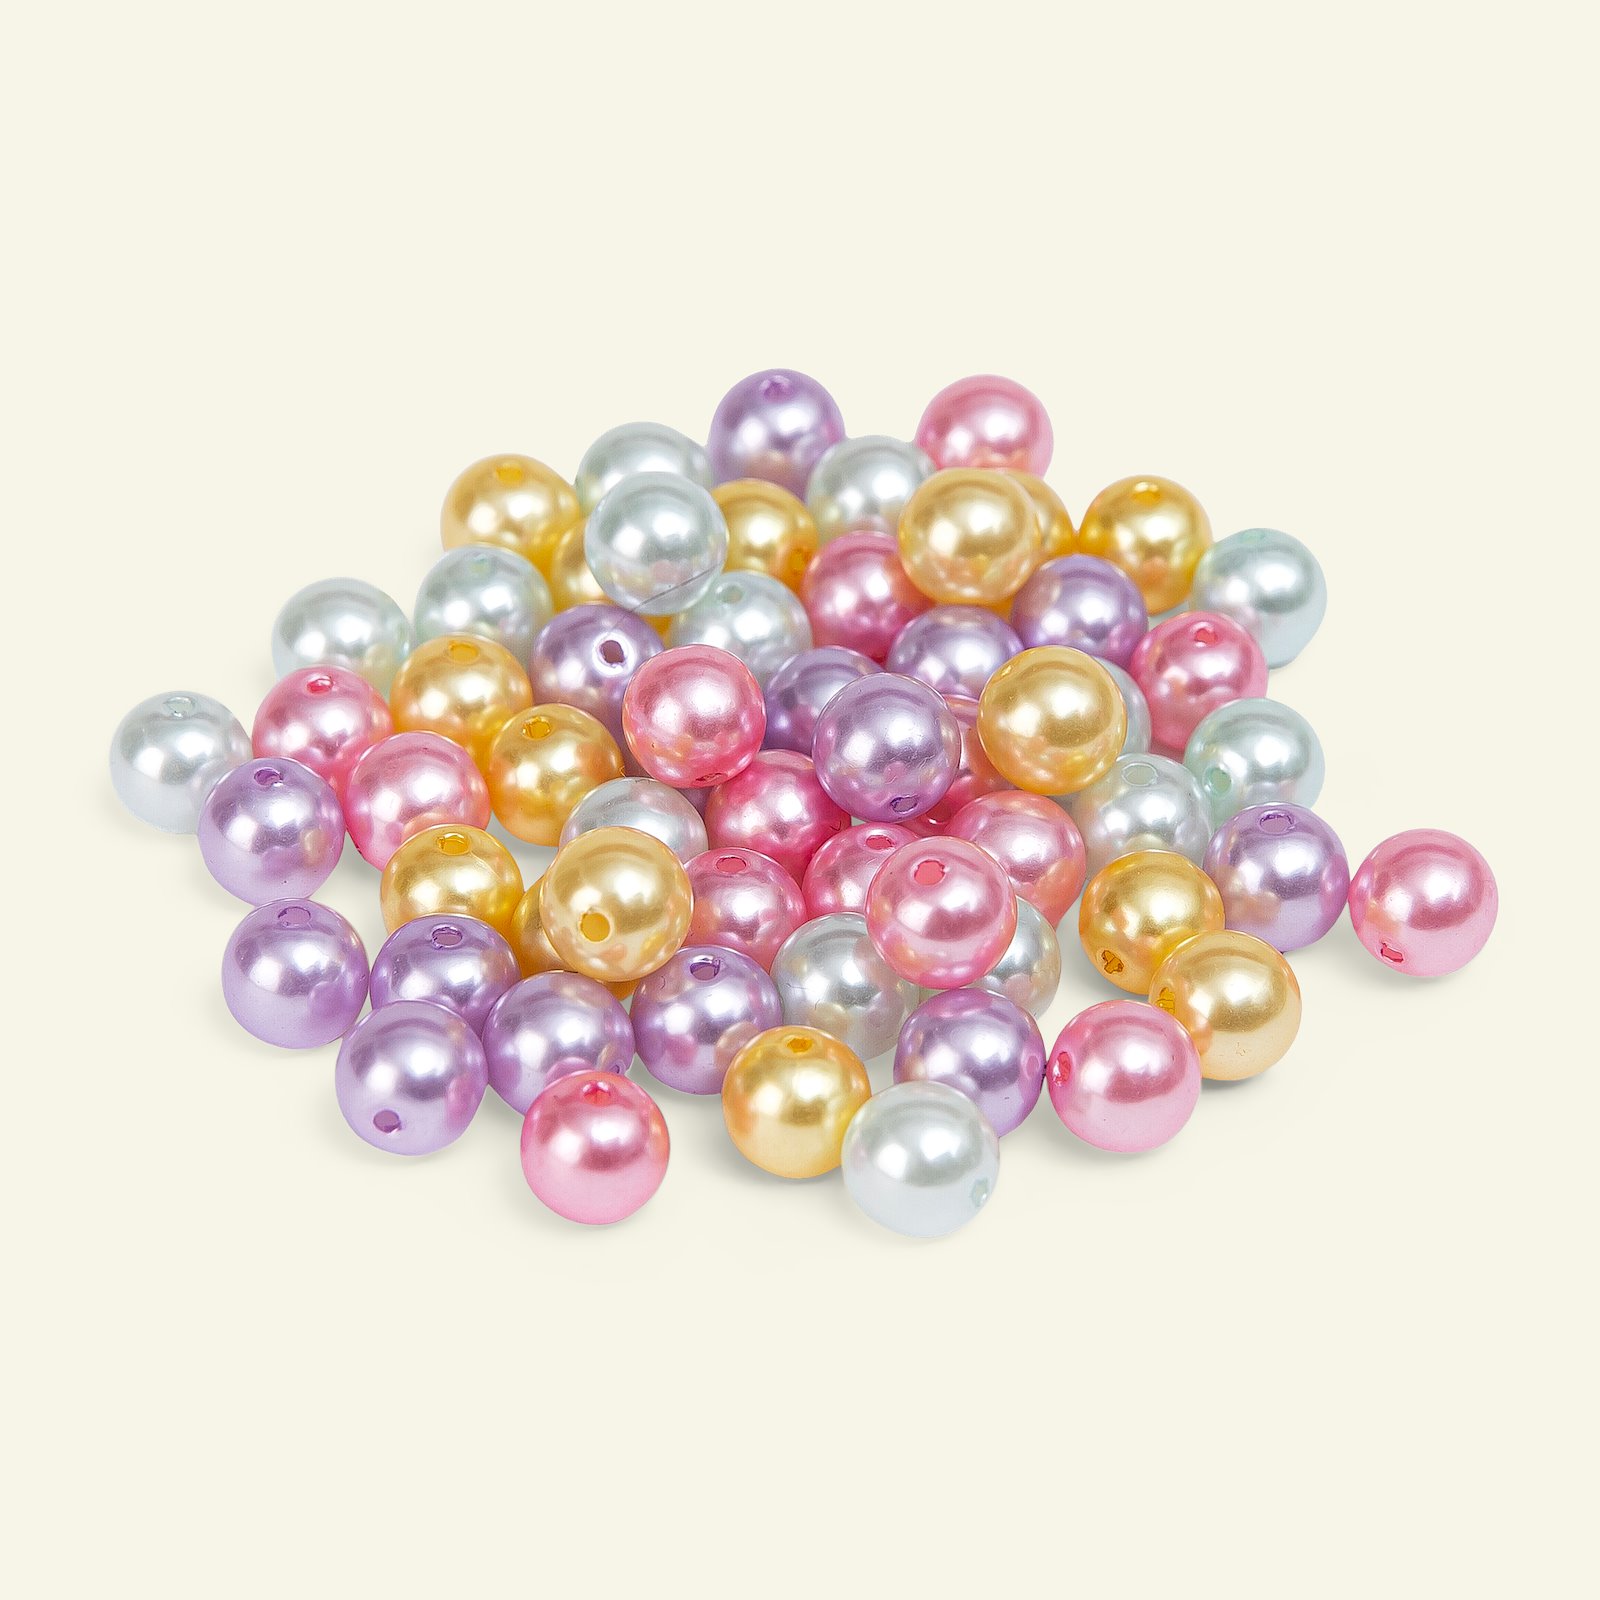 Beads 10mm mother of pearl 4 col. 60pcs 43260_pack